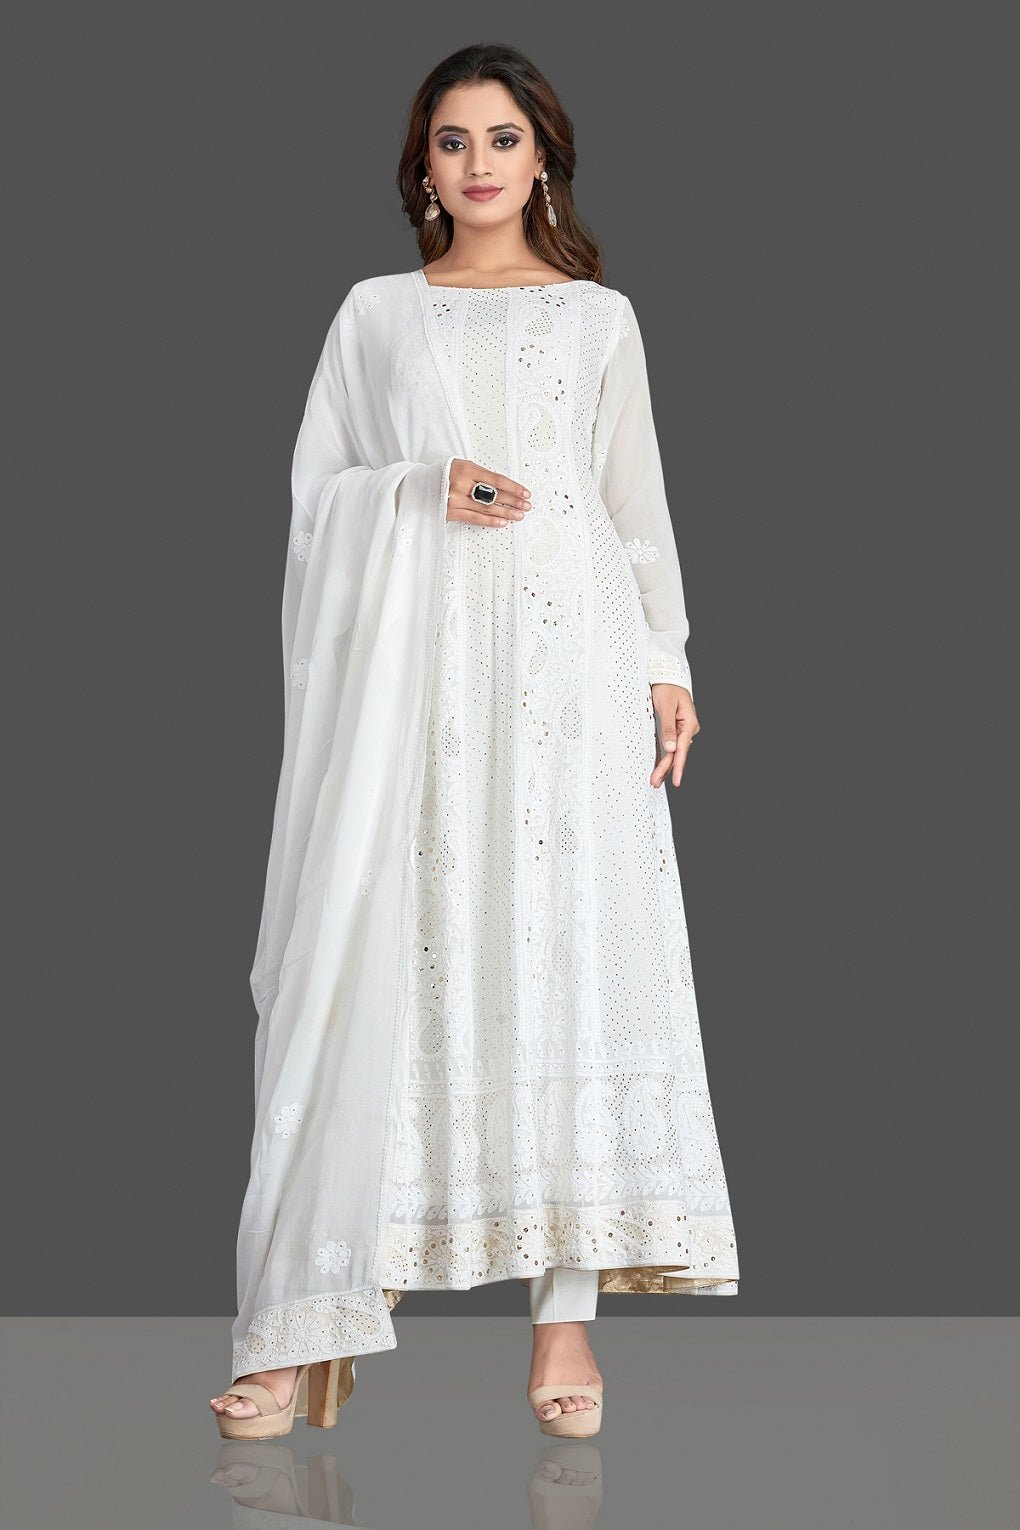 Buy stunning white georgette Lucknowi chikankari Anarkali suit online in USA. Flaunt your sartorial choice with beautiful embroidered Anarkali, sharara suits, designer lehengas, designer gowns from Pure Elegance Indian saree store in USA.-front